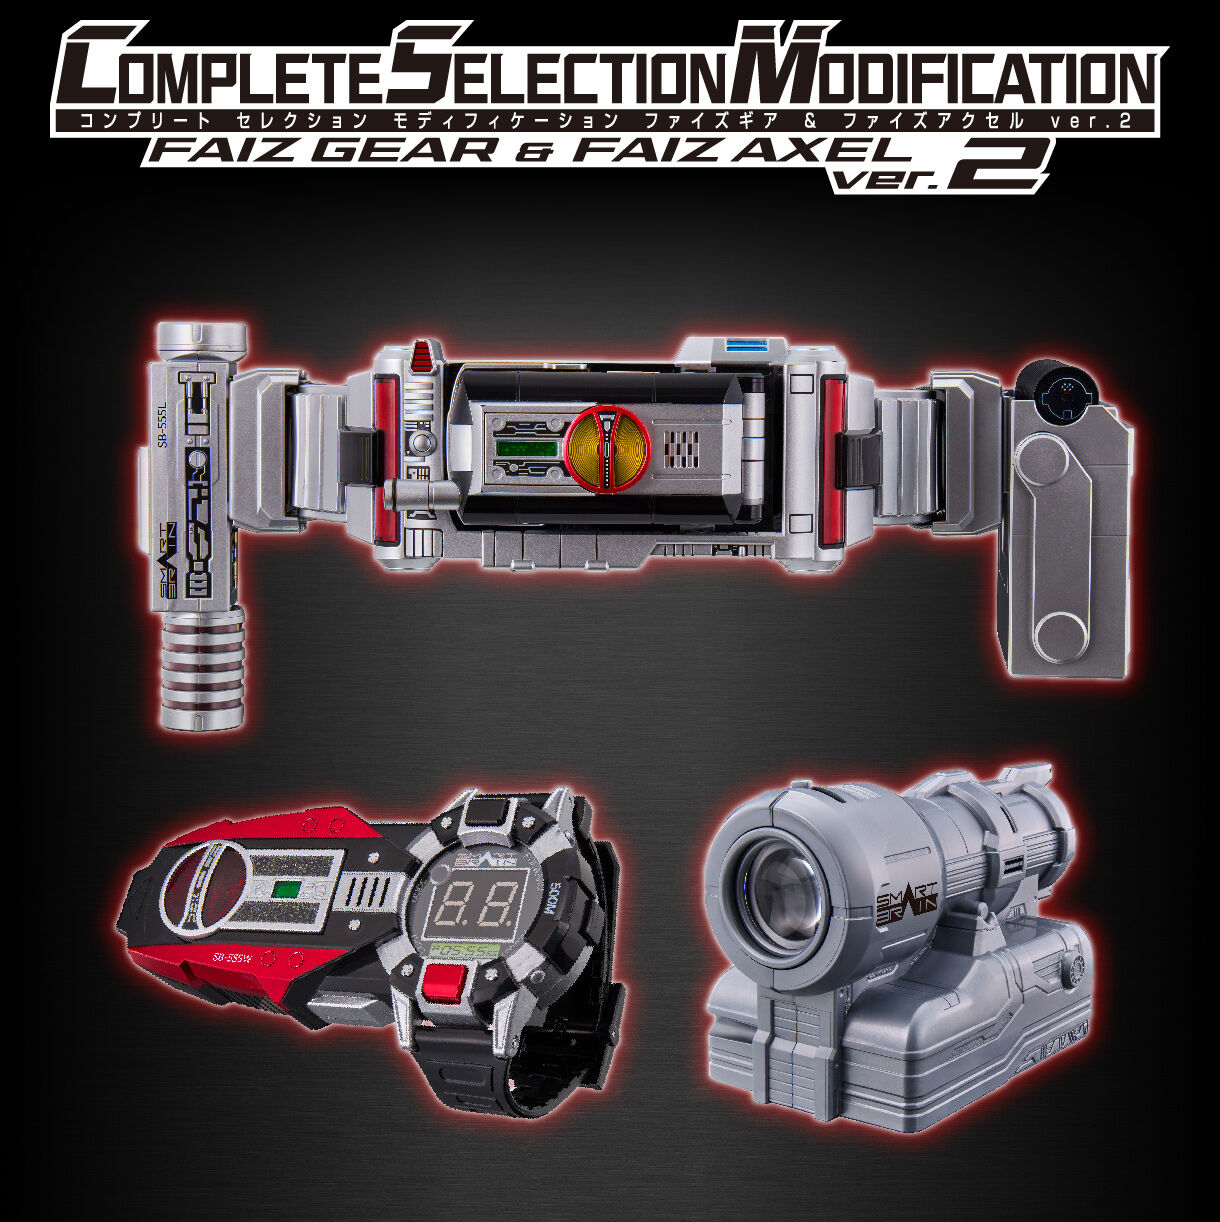 COMPLETE SELECTION MODIFICATION ファイズギア＆ファイズアクセル ver.2